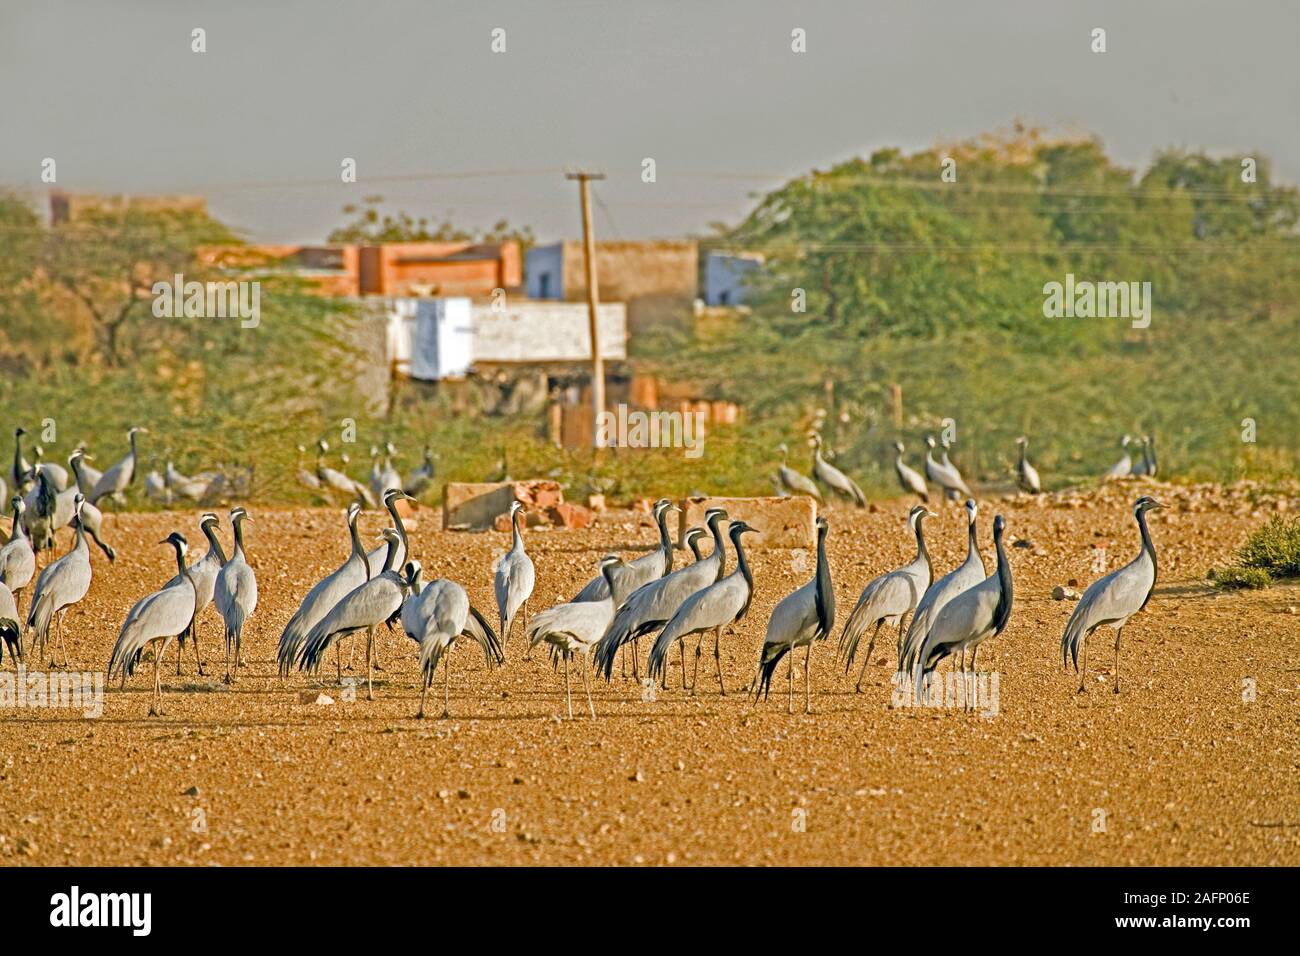 DEMOISELLE CRANES (Anthropoides virgo). Overwintering birds encouraged by villagers who provide food, feed them. Here awaiting food delivery. Khichan, Stock Photo